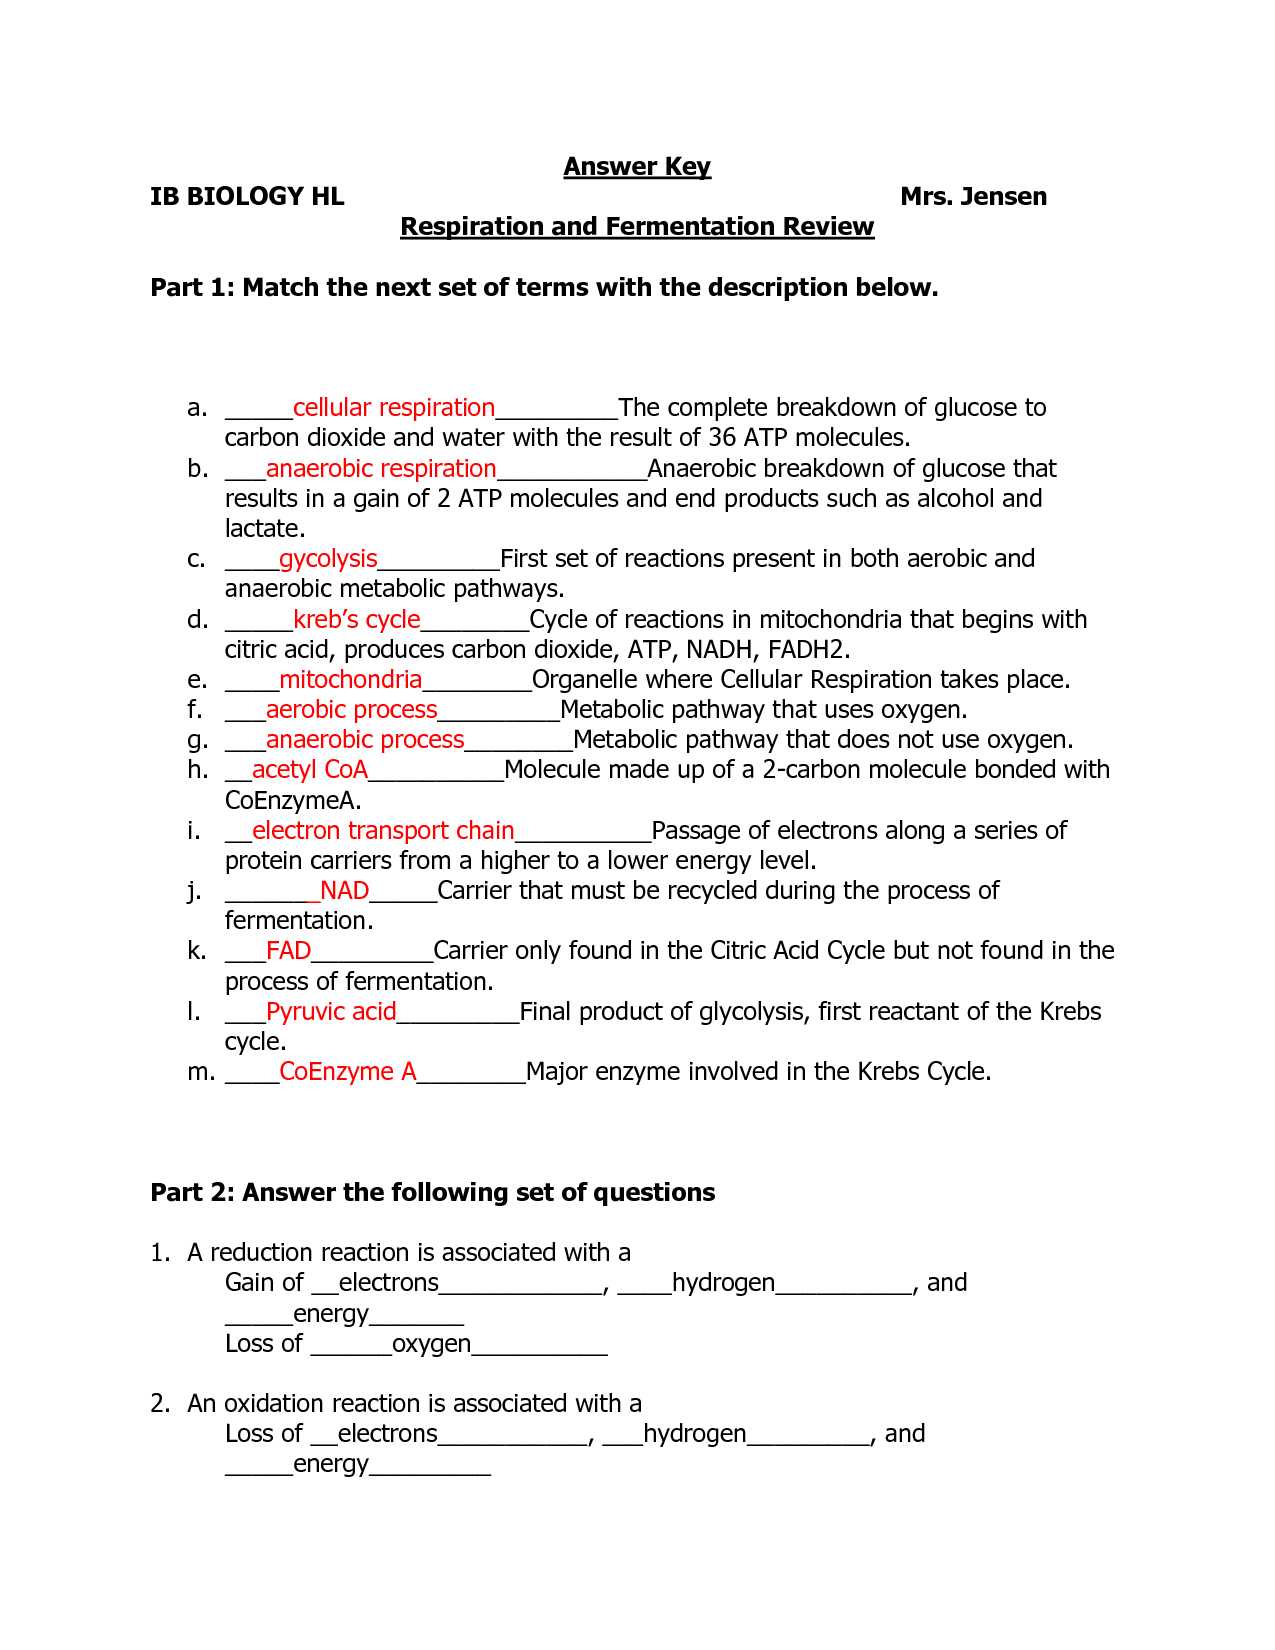 The Human Digestive Tract Worksheet Answers together with Worksheet Cardiovascular System Worksheet Ewinetaste Worksheet